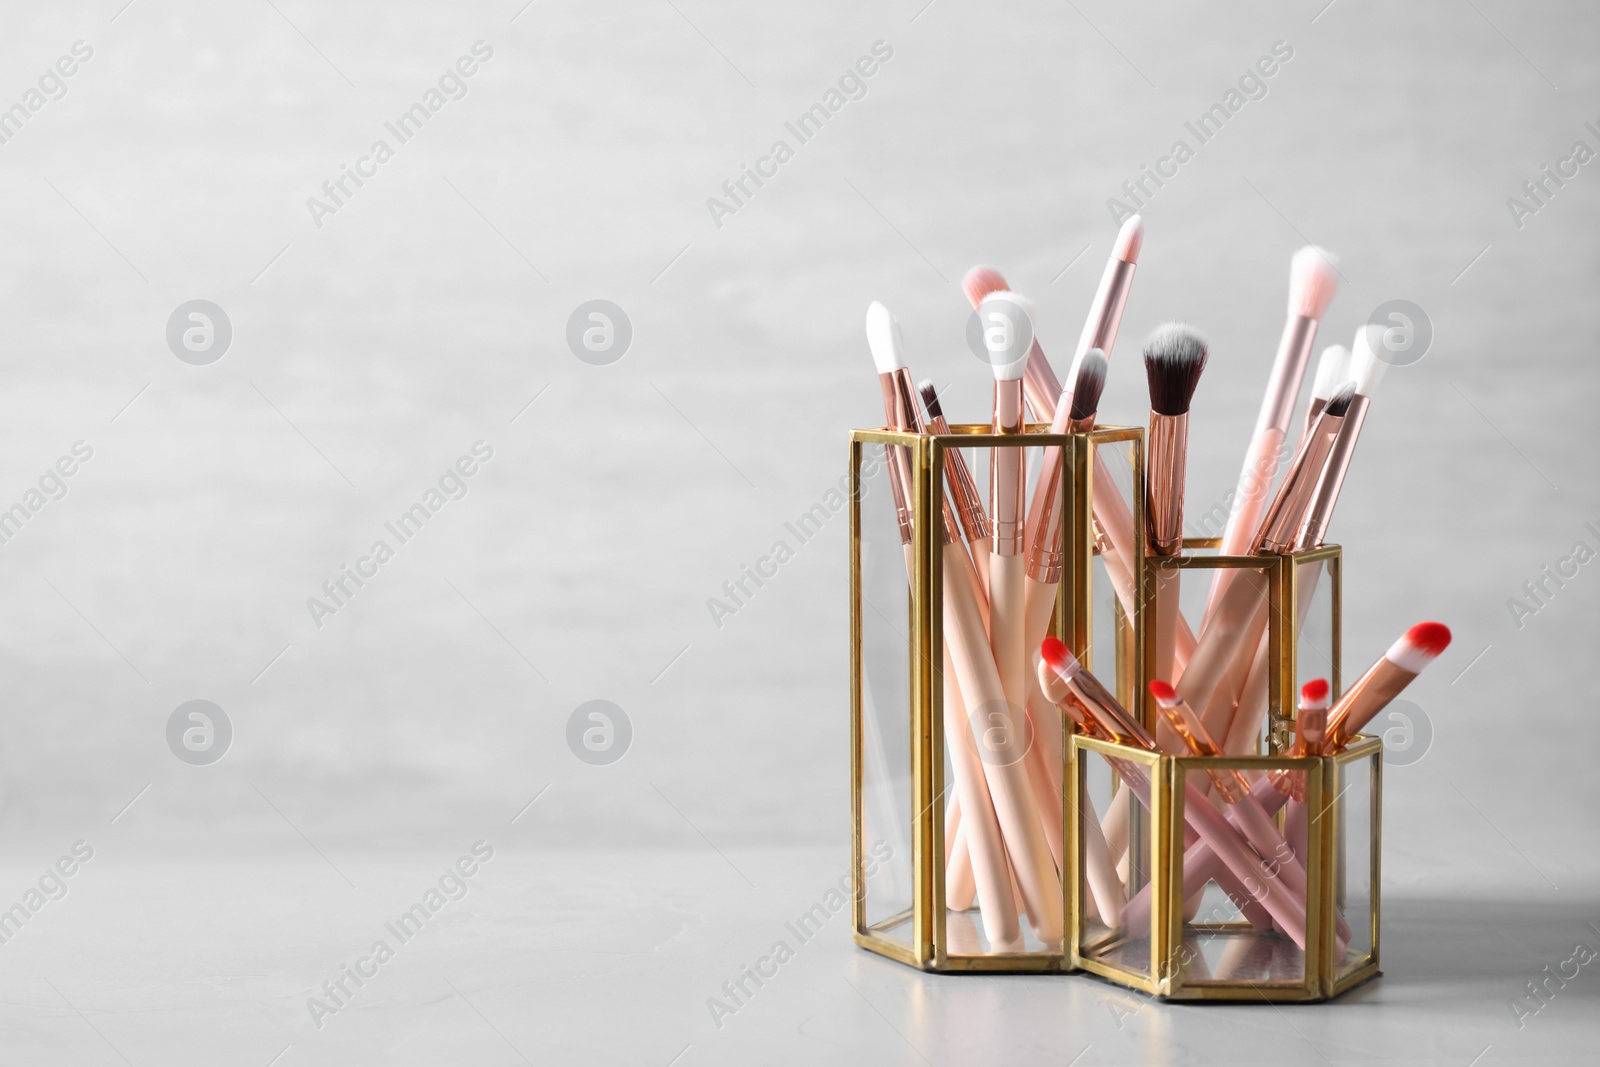 Photo of Make up brushes in holders on white table. Space for text